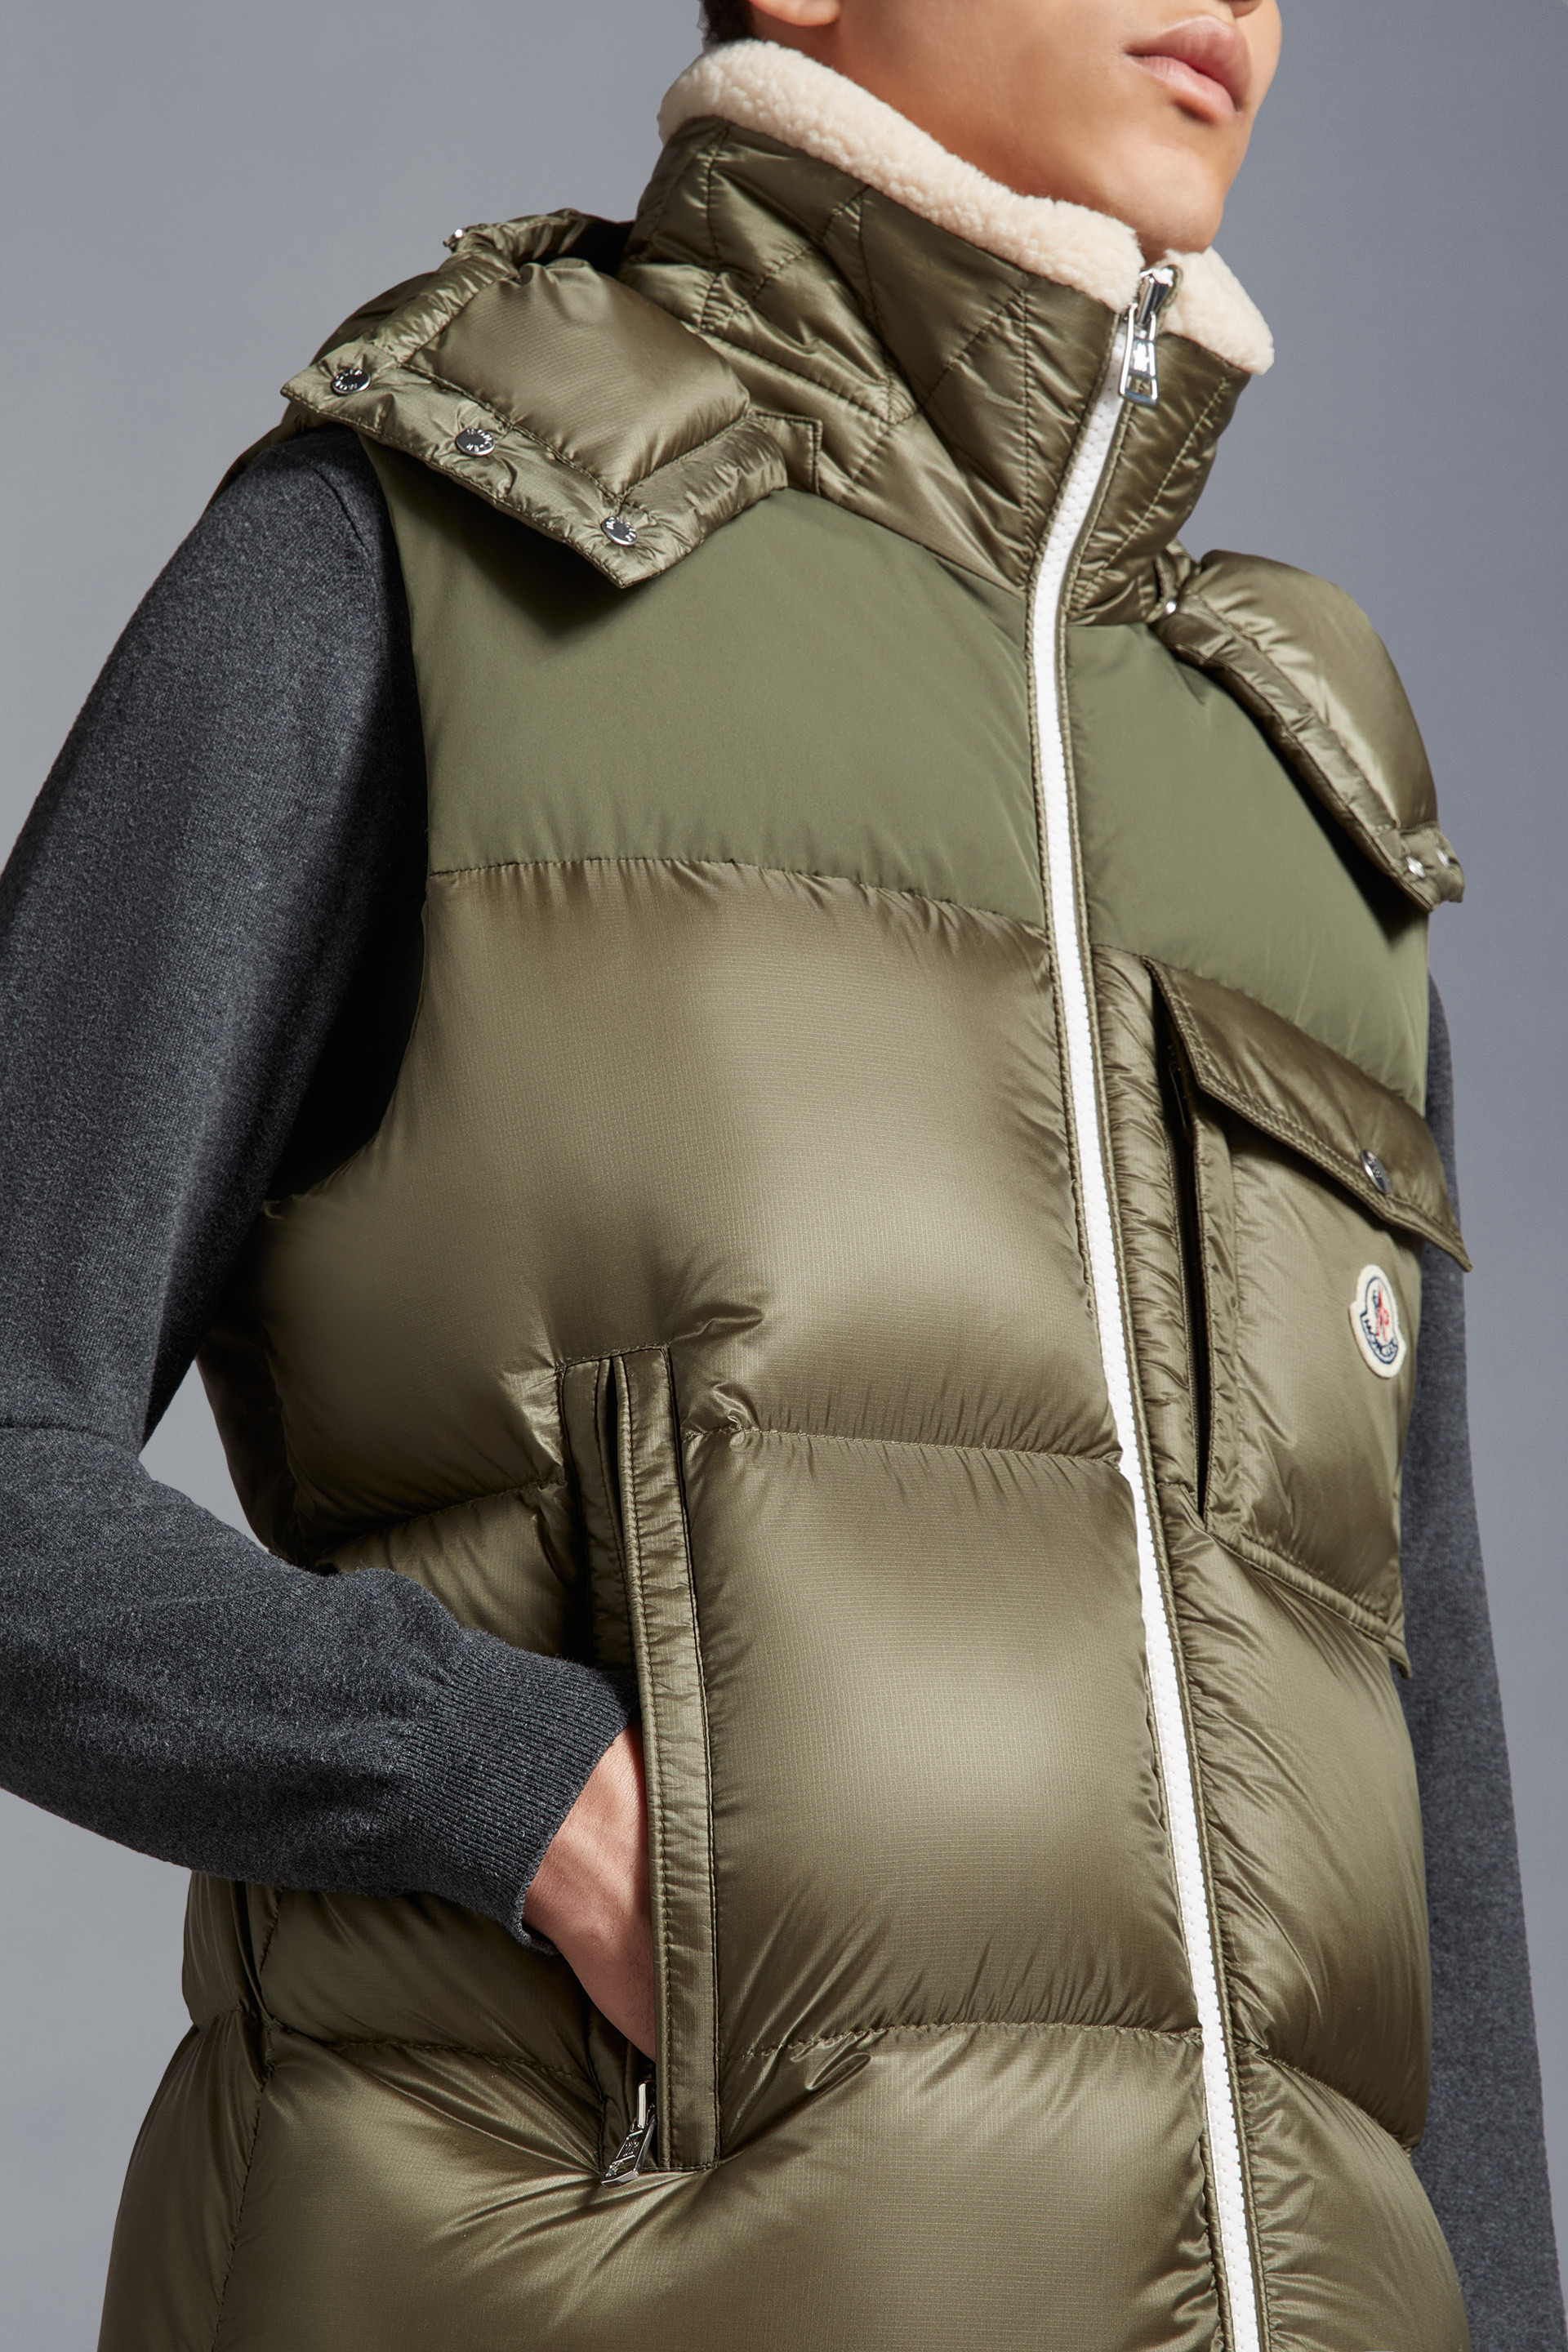 Moncler Canada Online Shop — Down jackets, coats, and clothing